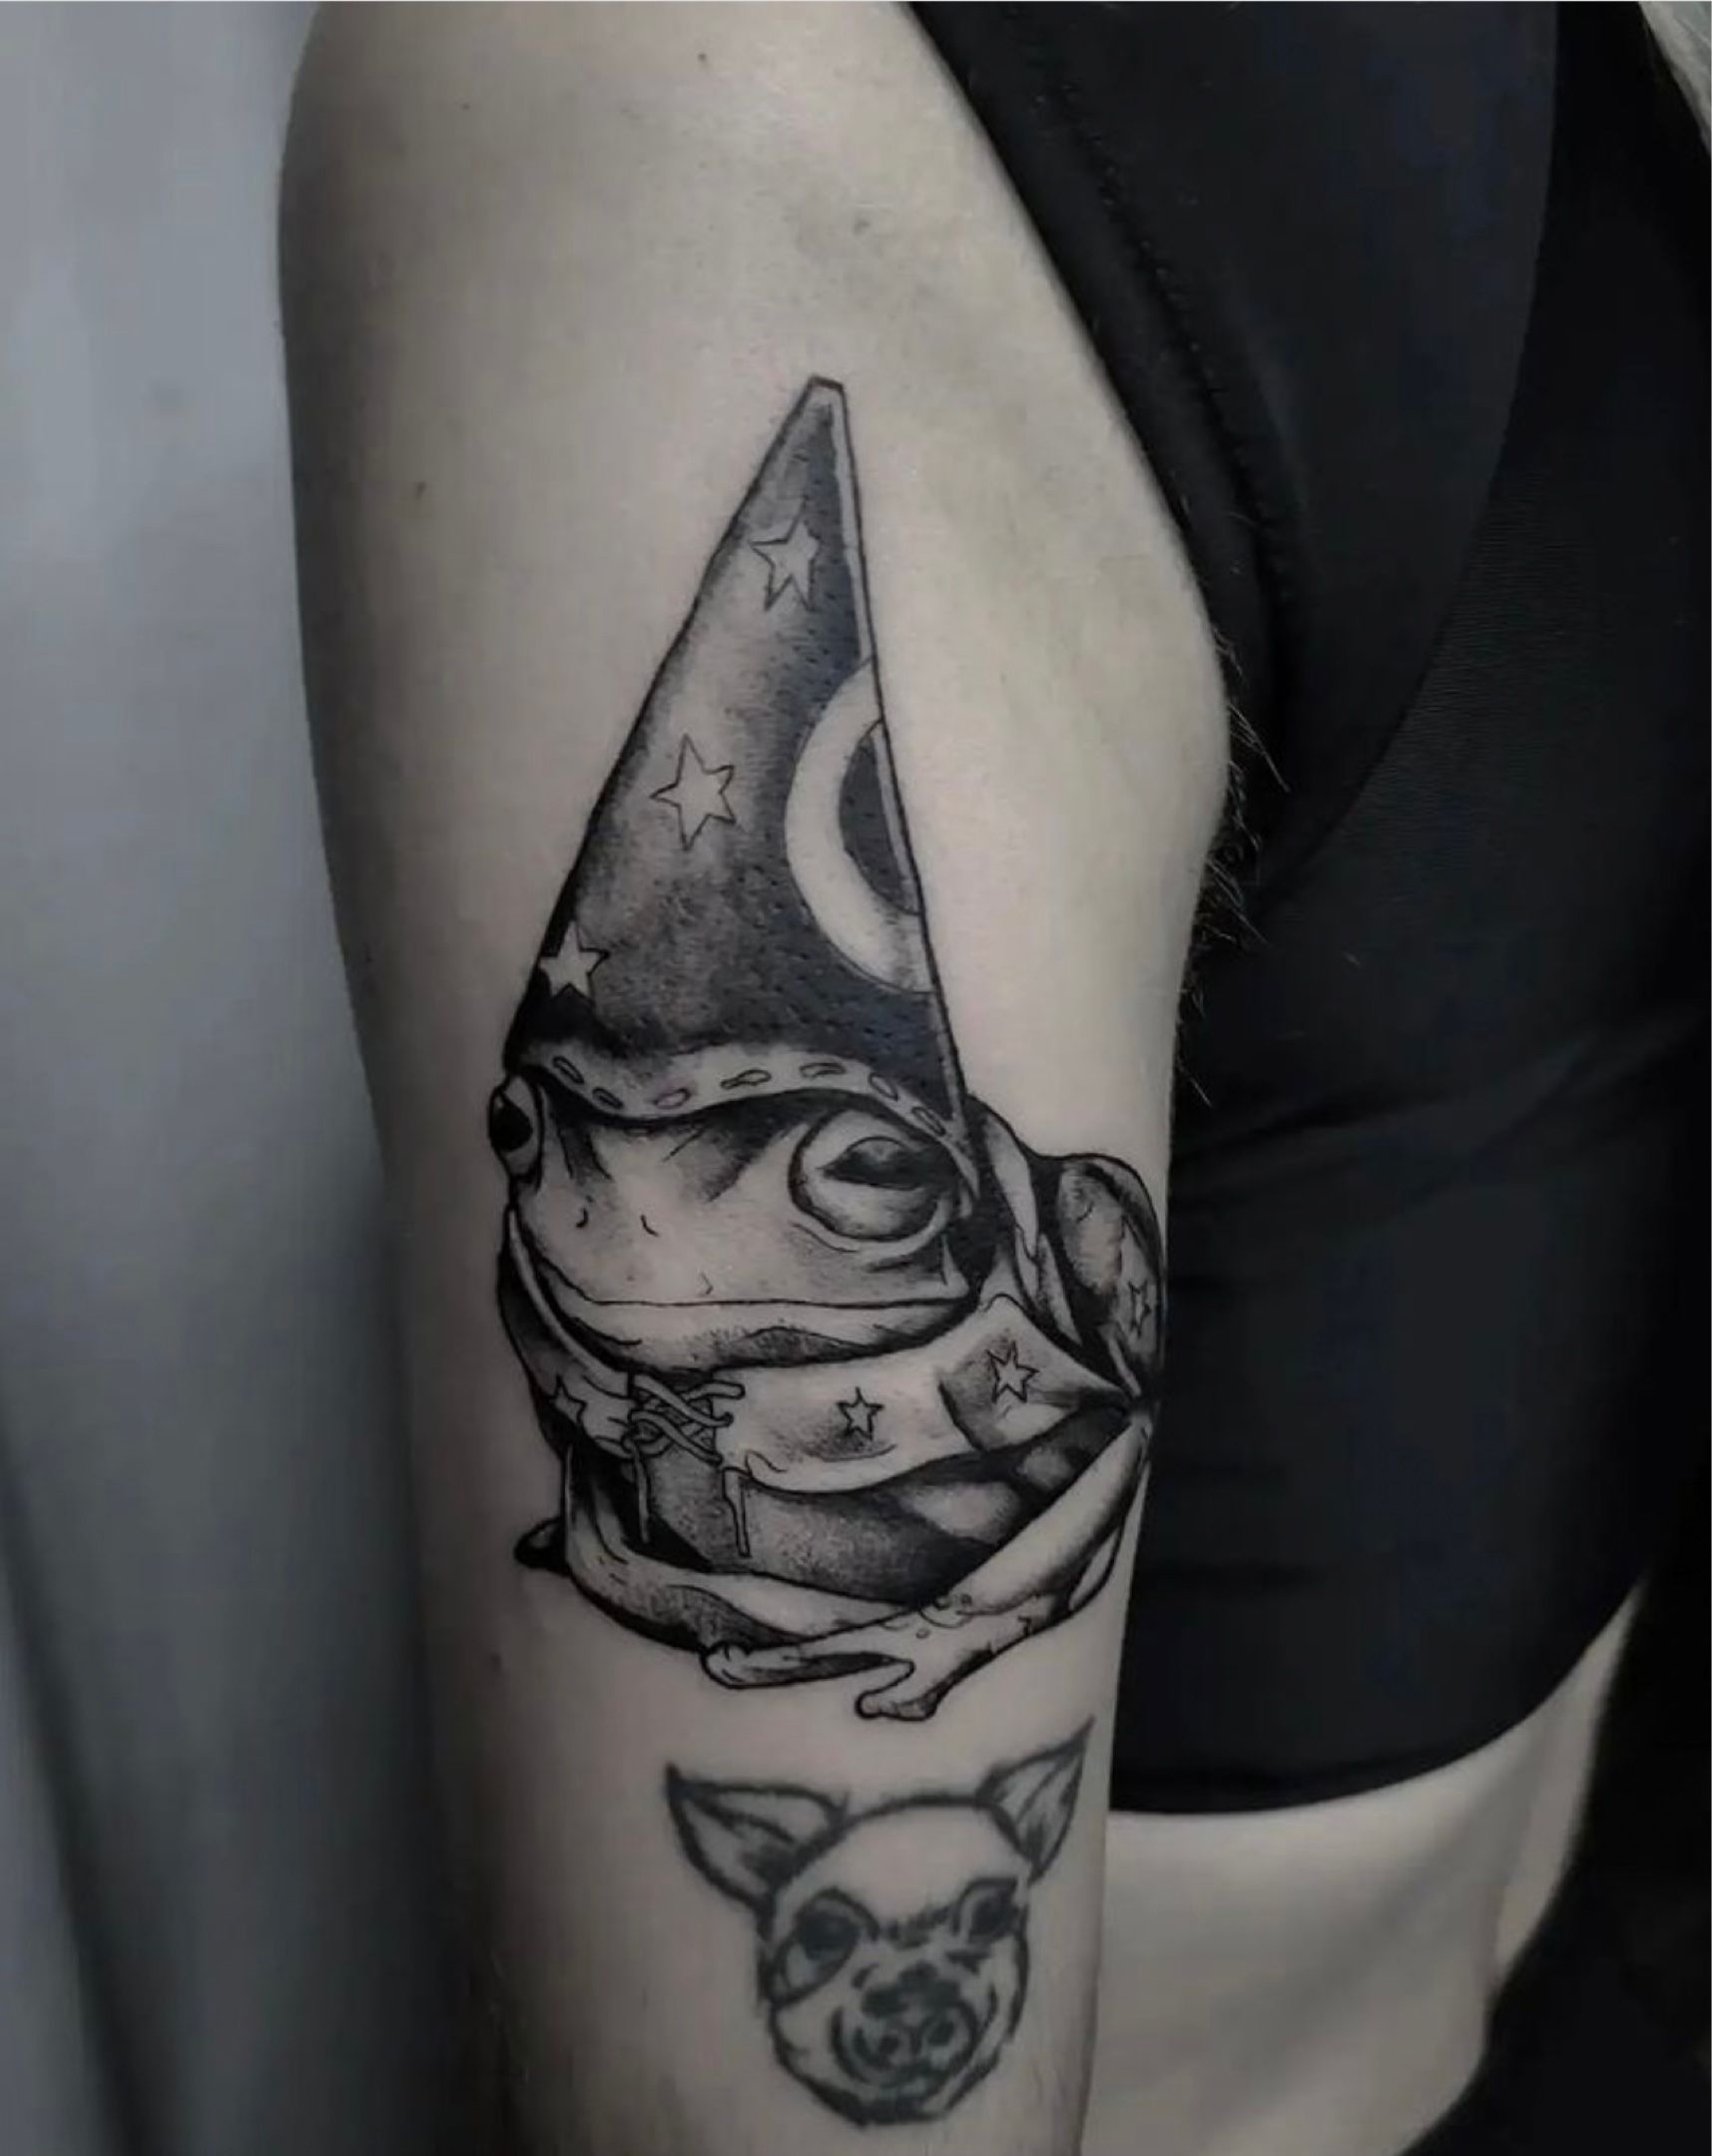 Skin fx tattoos  Wizard frog done by Luke  To book in give us a call  on  07 55921905 or Send us an email on  infogoldcoasttattooscomau   Facebook